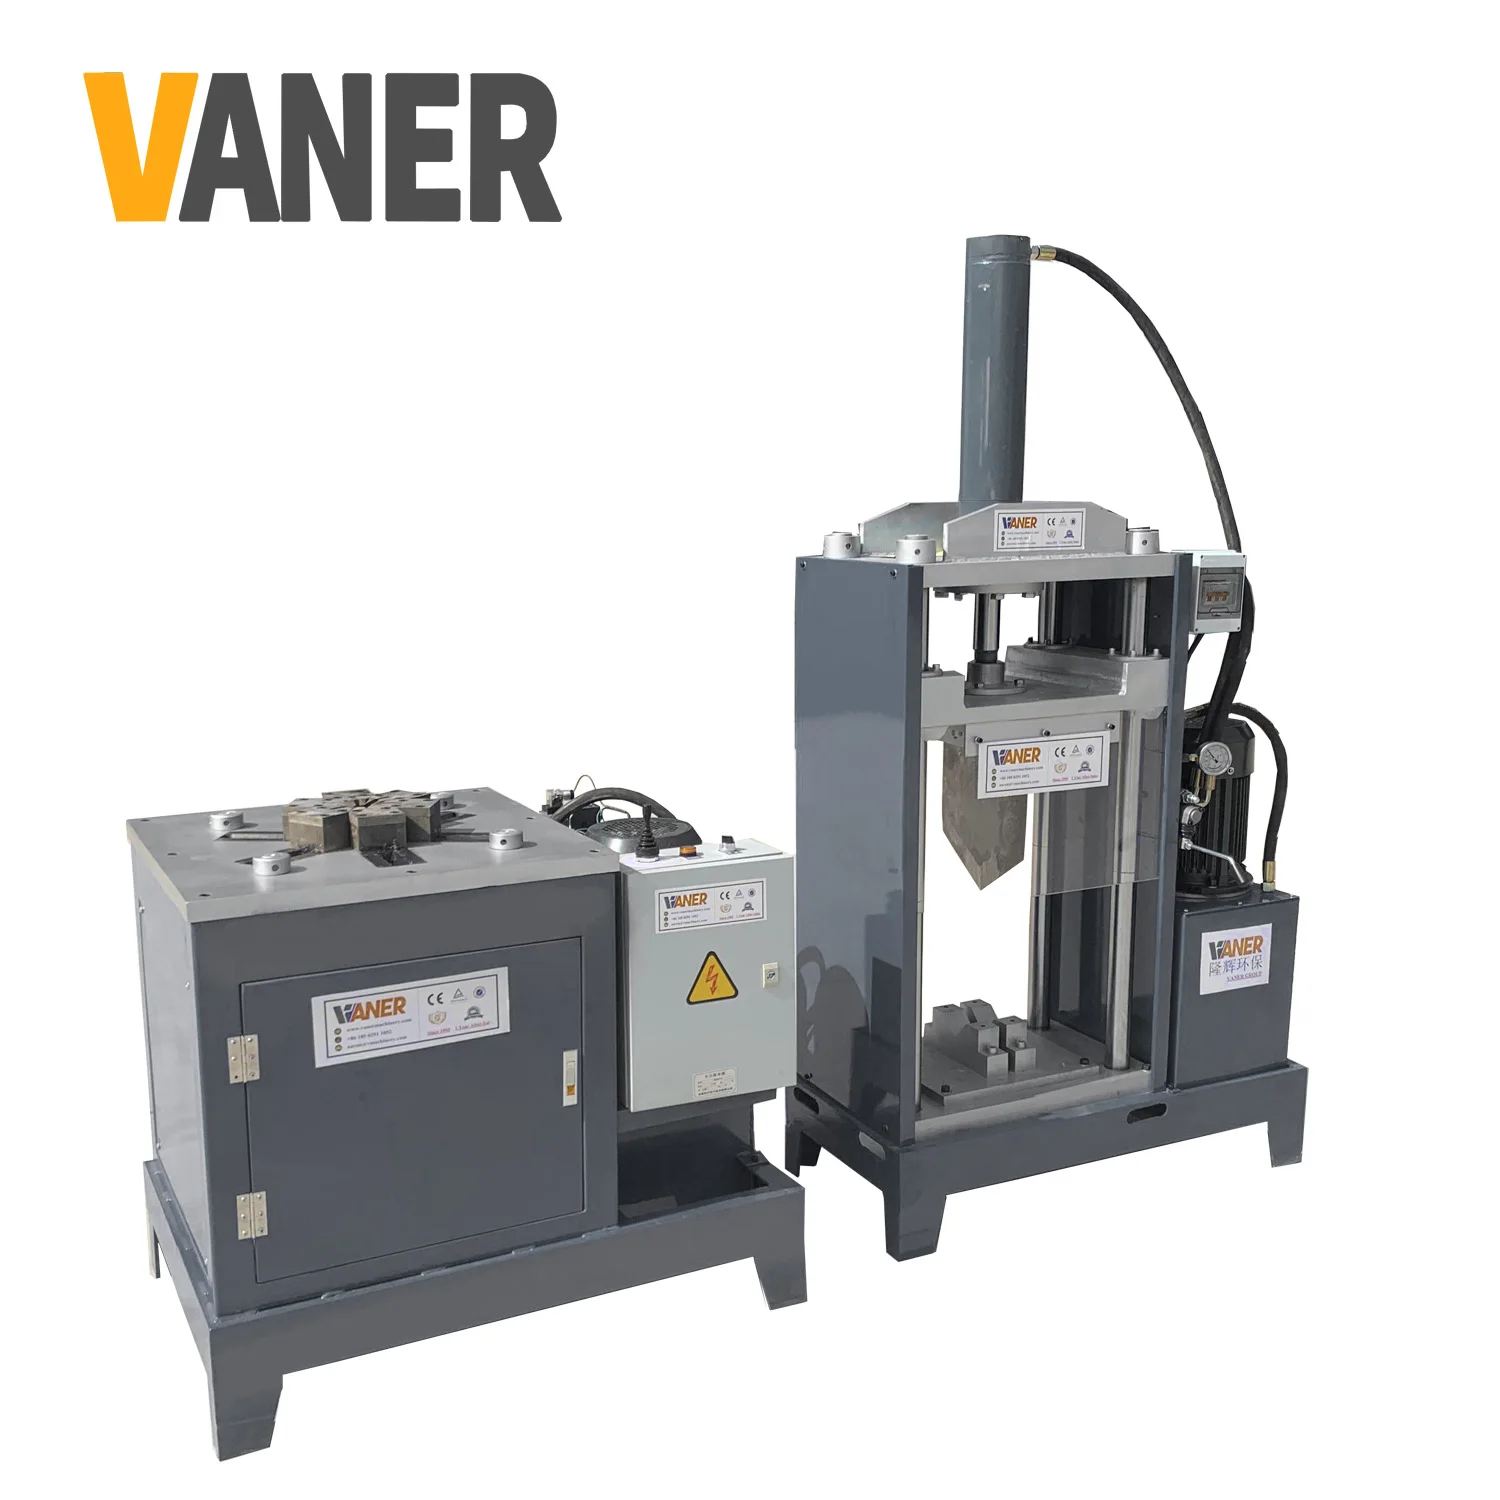 VANER used copper stator recycling machine used electric motor wrecker